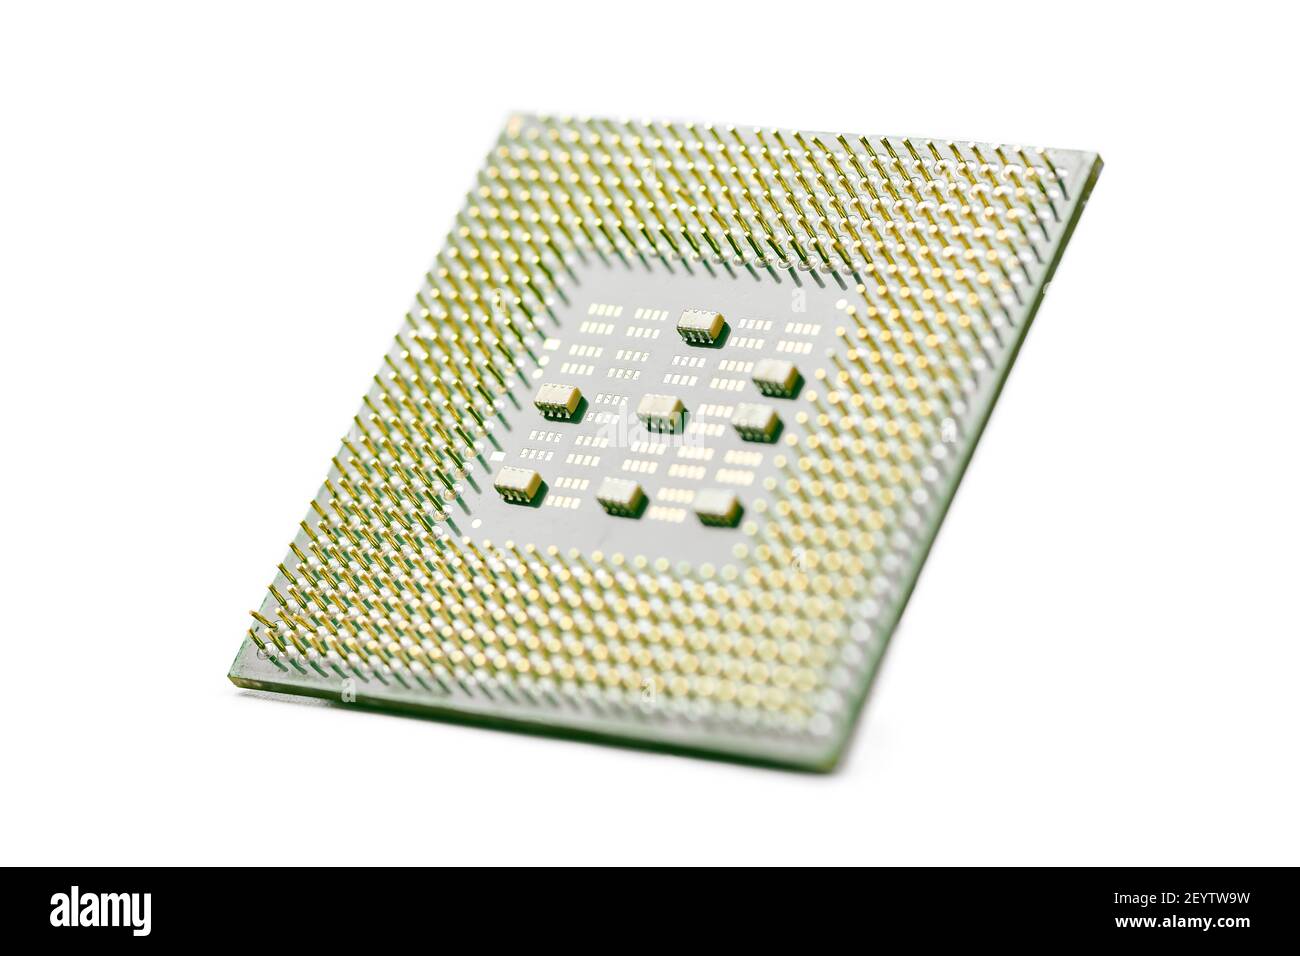 CPU, central processor unit, isolated background. Main electronic circuitry for computer. Shallow DOF Stock Photo